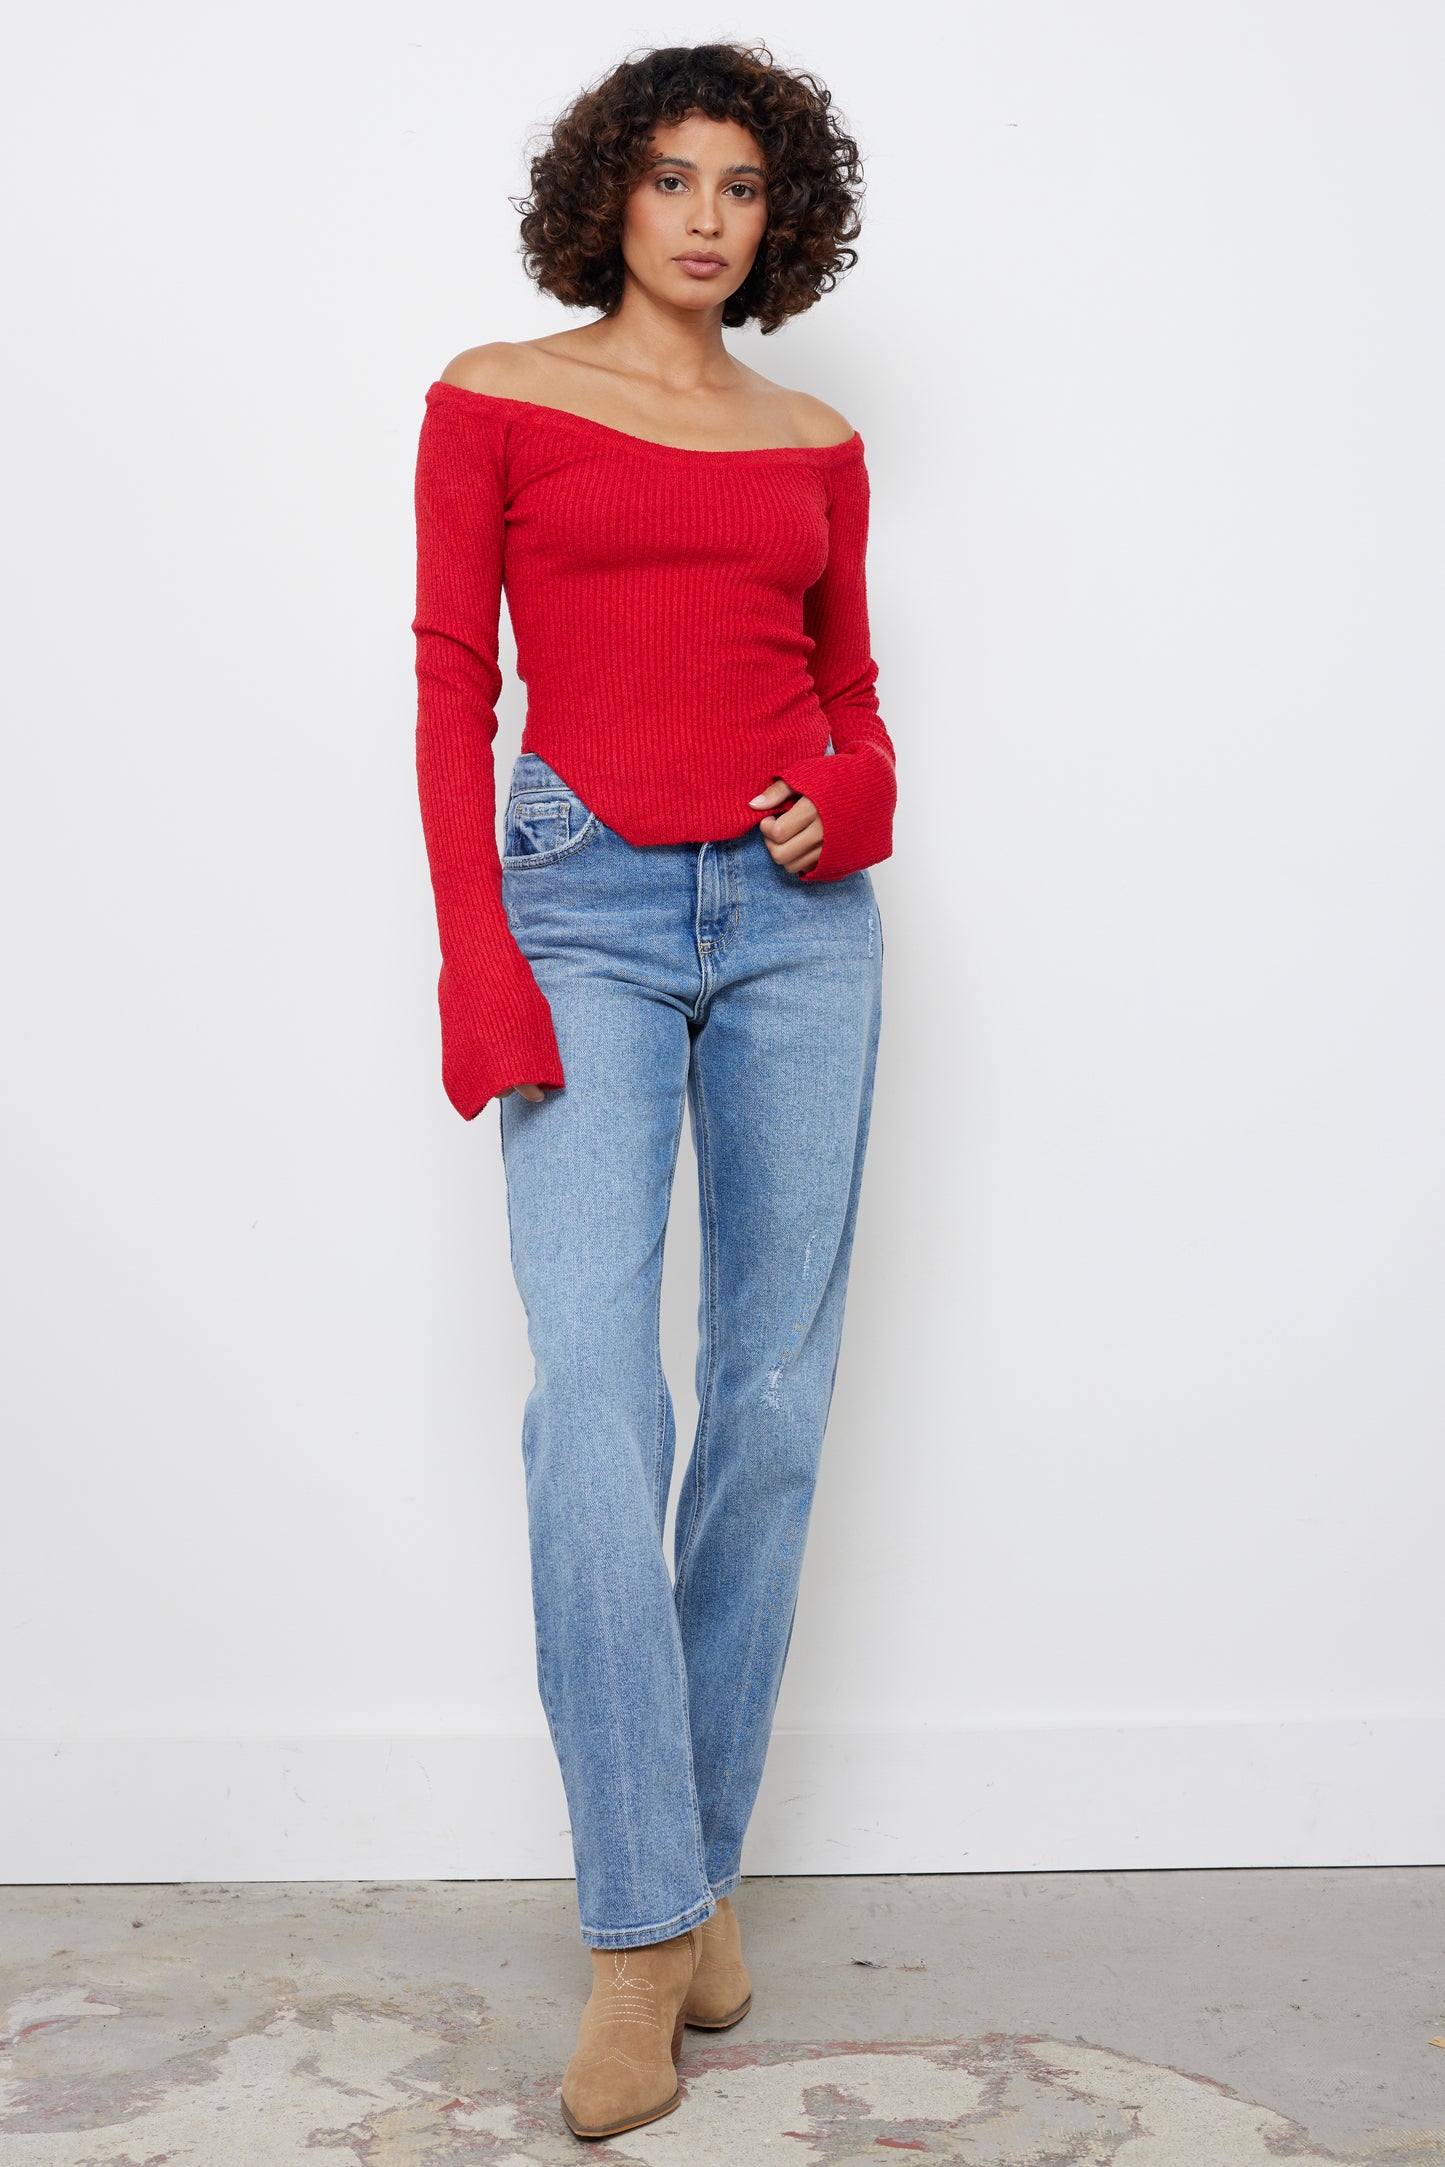 Offly Nice Red Knit Top